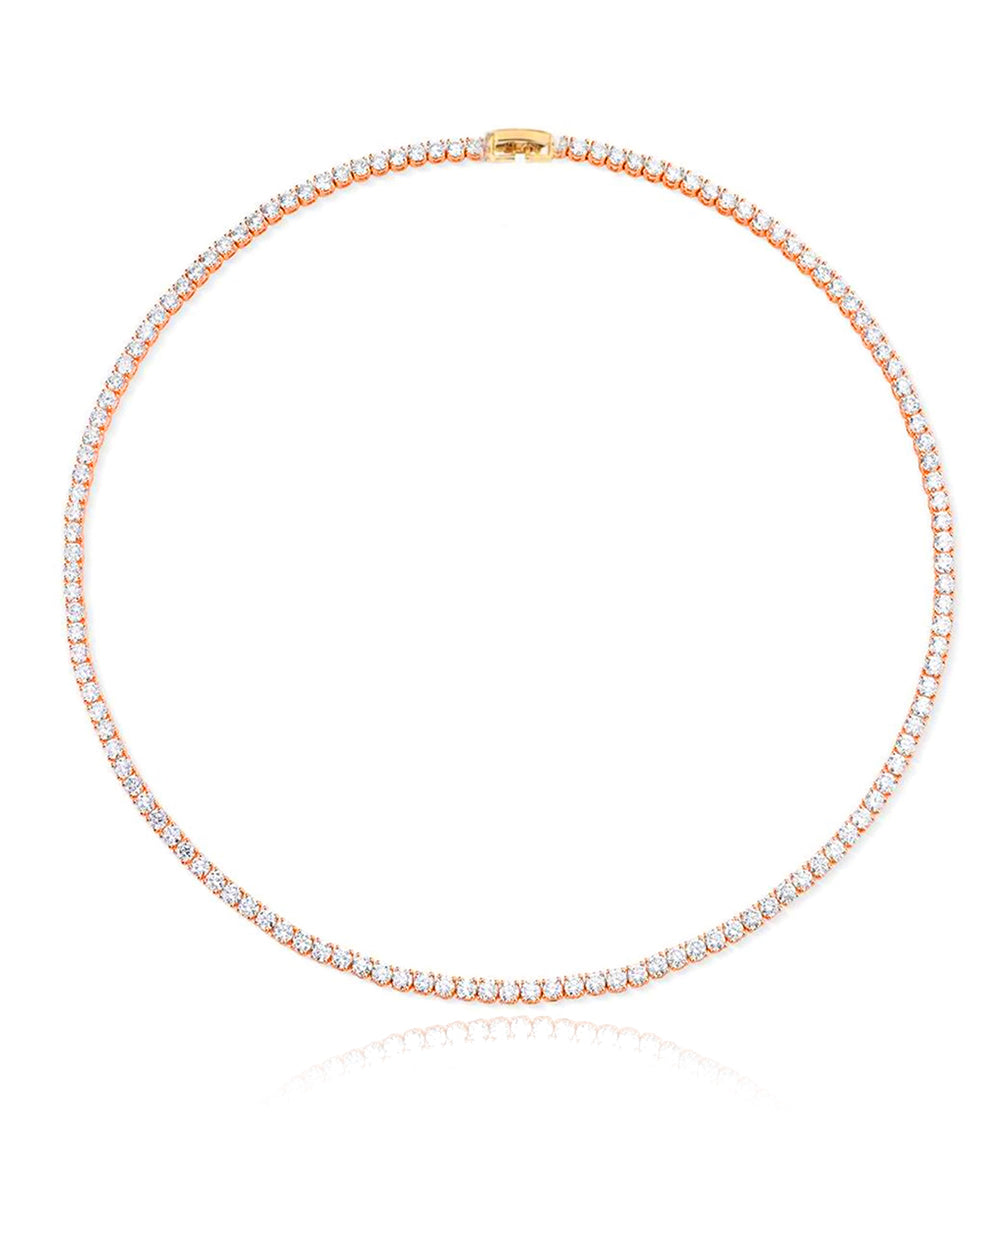 BABY TENNIS CZ NECKLACE - 3 mm Gold - ACID ROSE JEWELRY